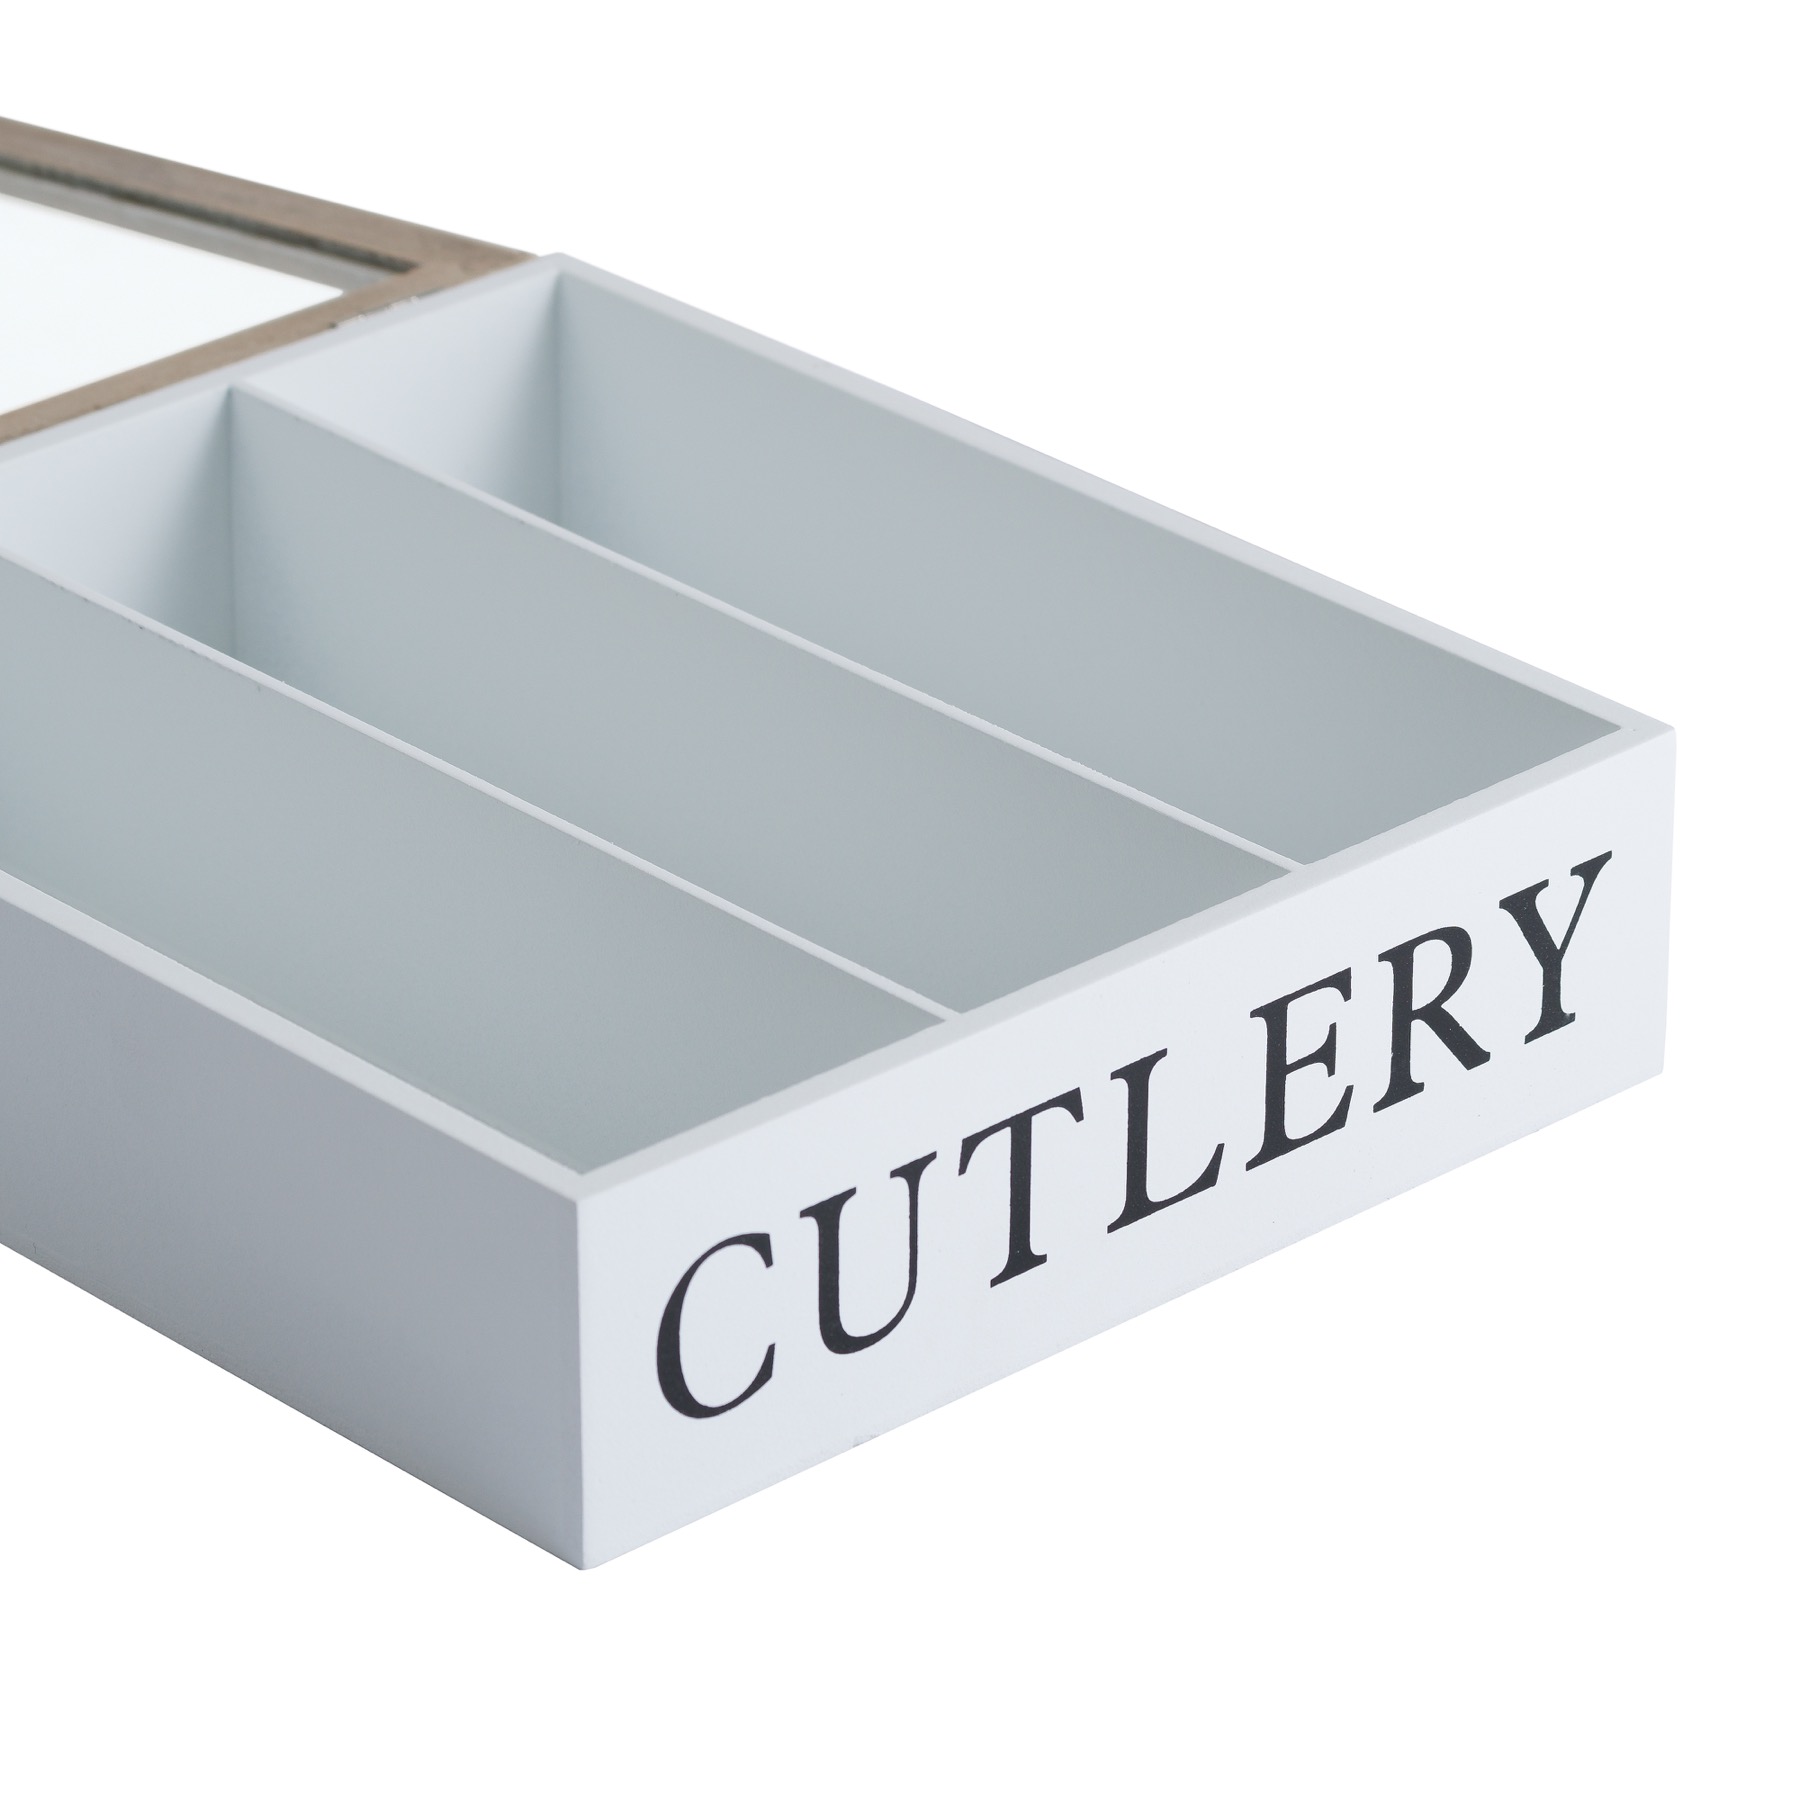 Country Cutlery Box - Image 2